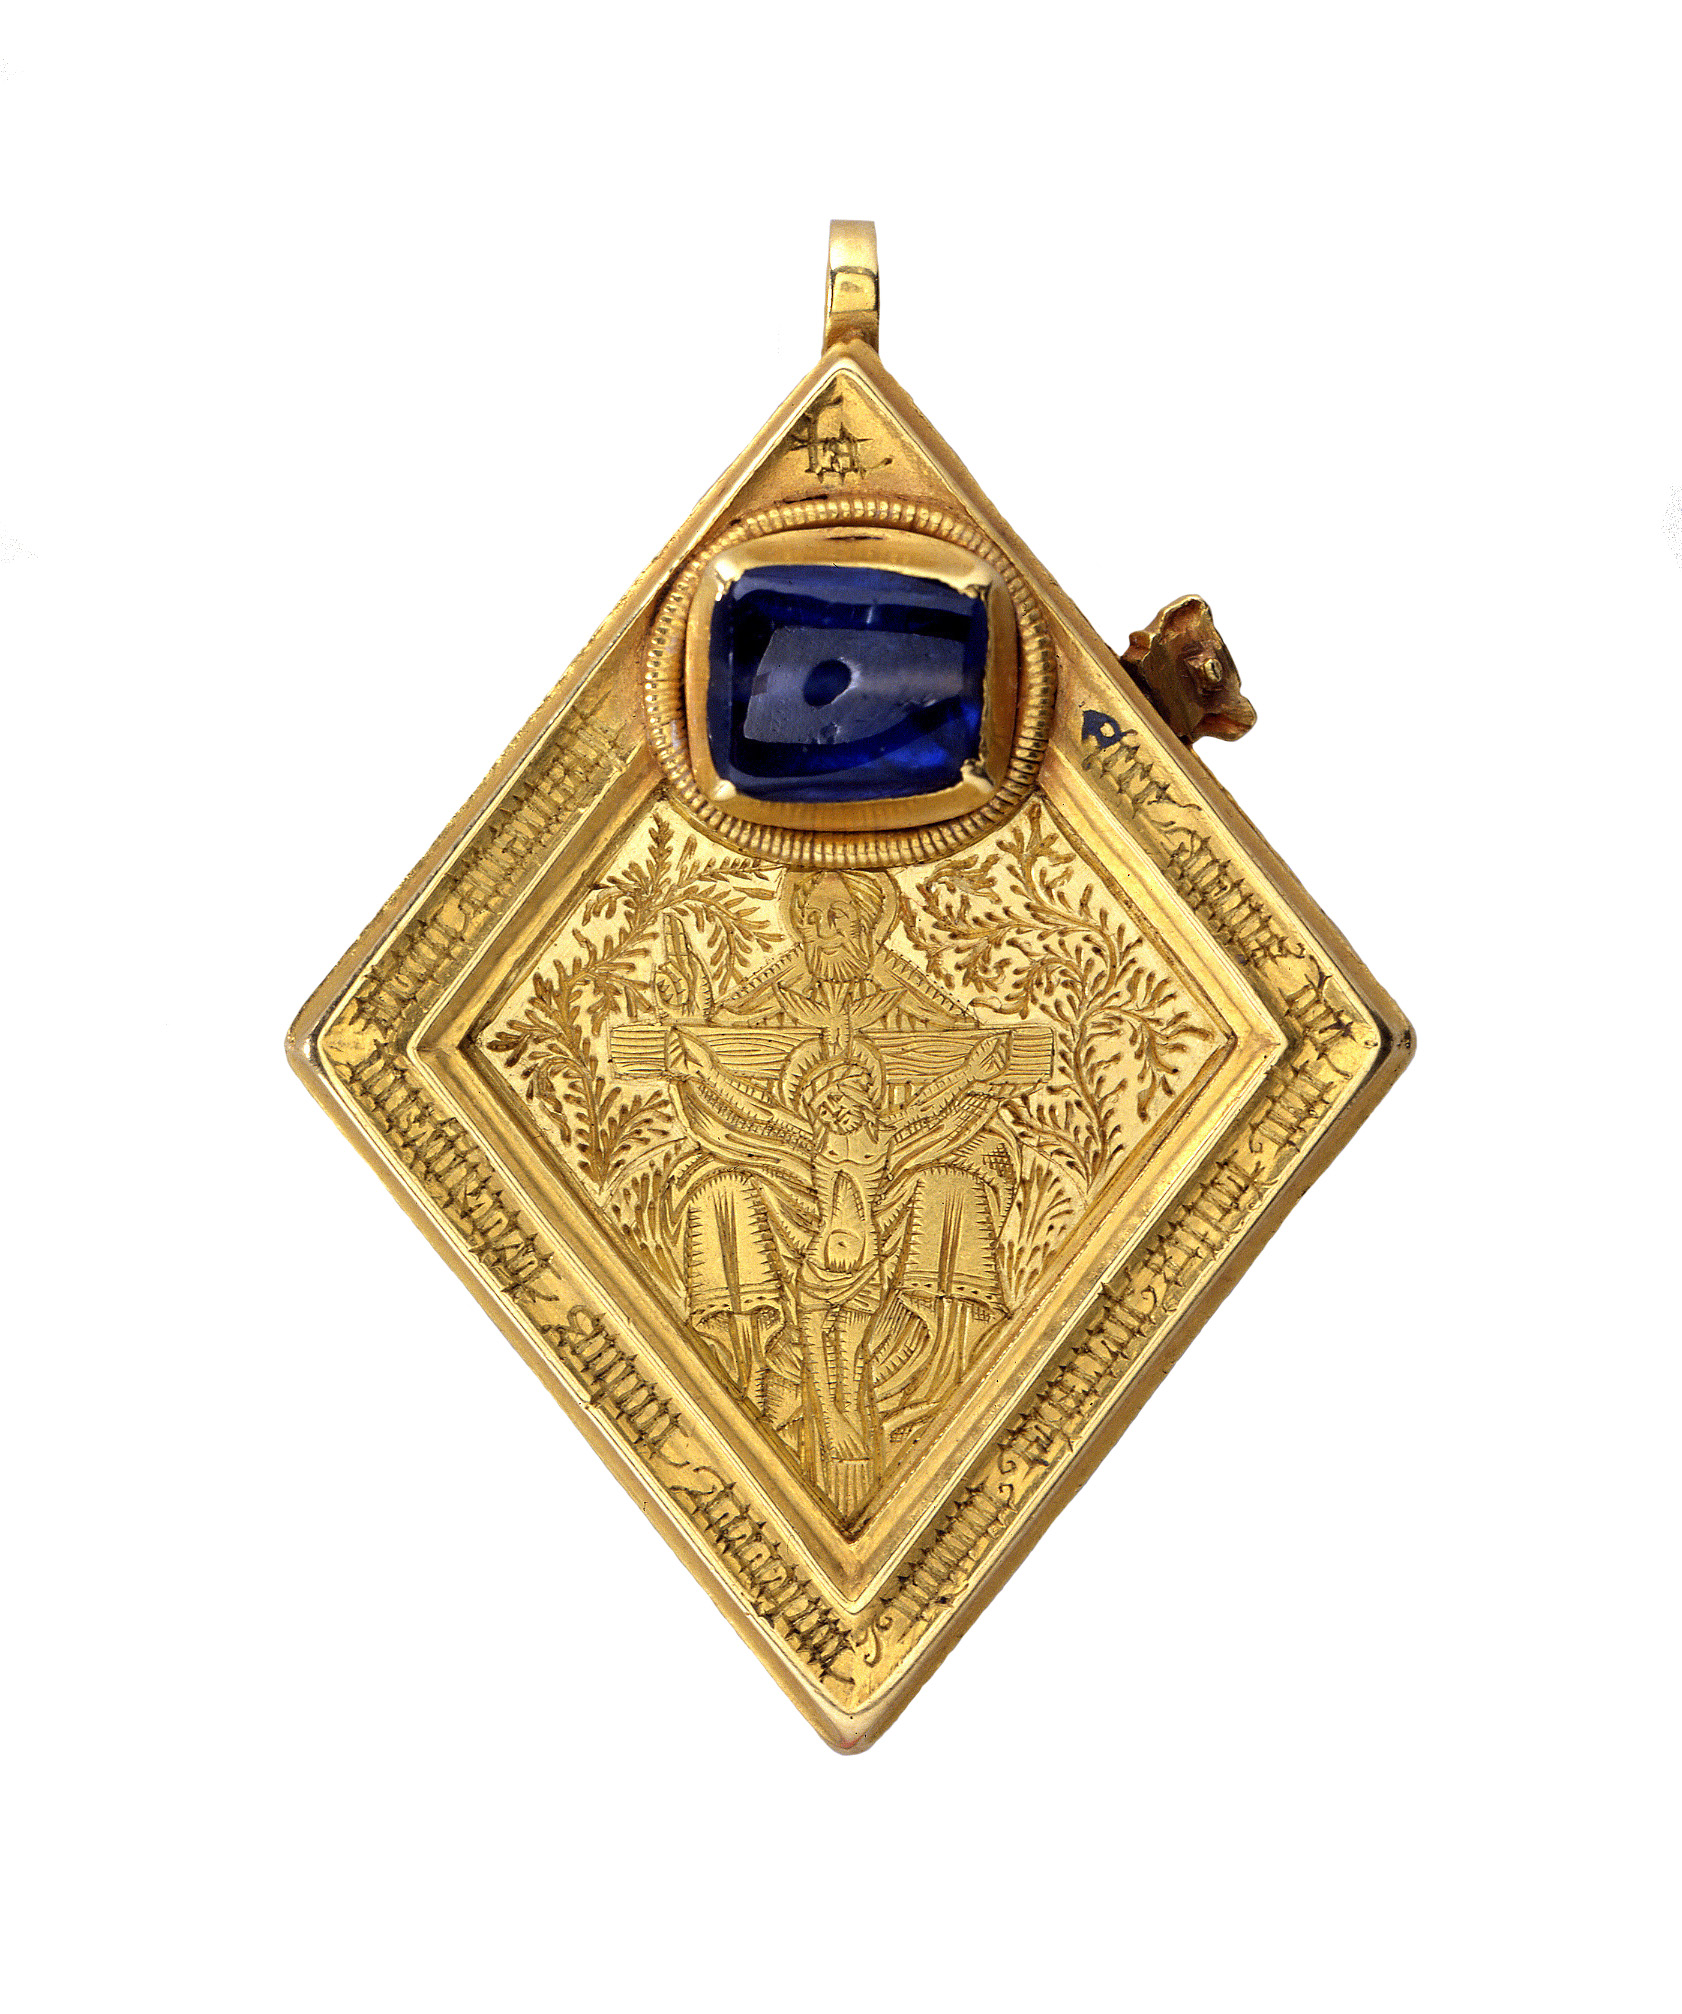 The Middleham Jewel by Unknown Artist - Third quarter of the 15th Century - 64 mm high; 48 mm wide; 62.65 grams weight The Yorkshire Museum